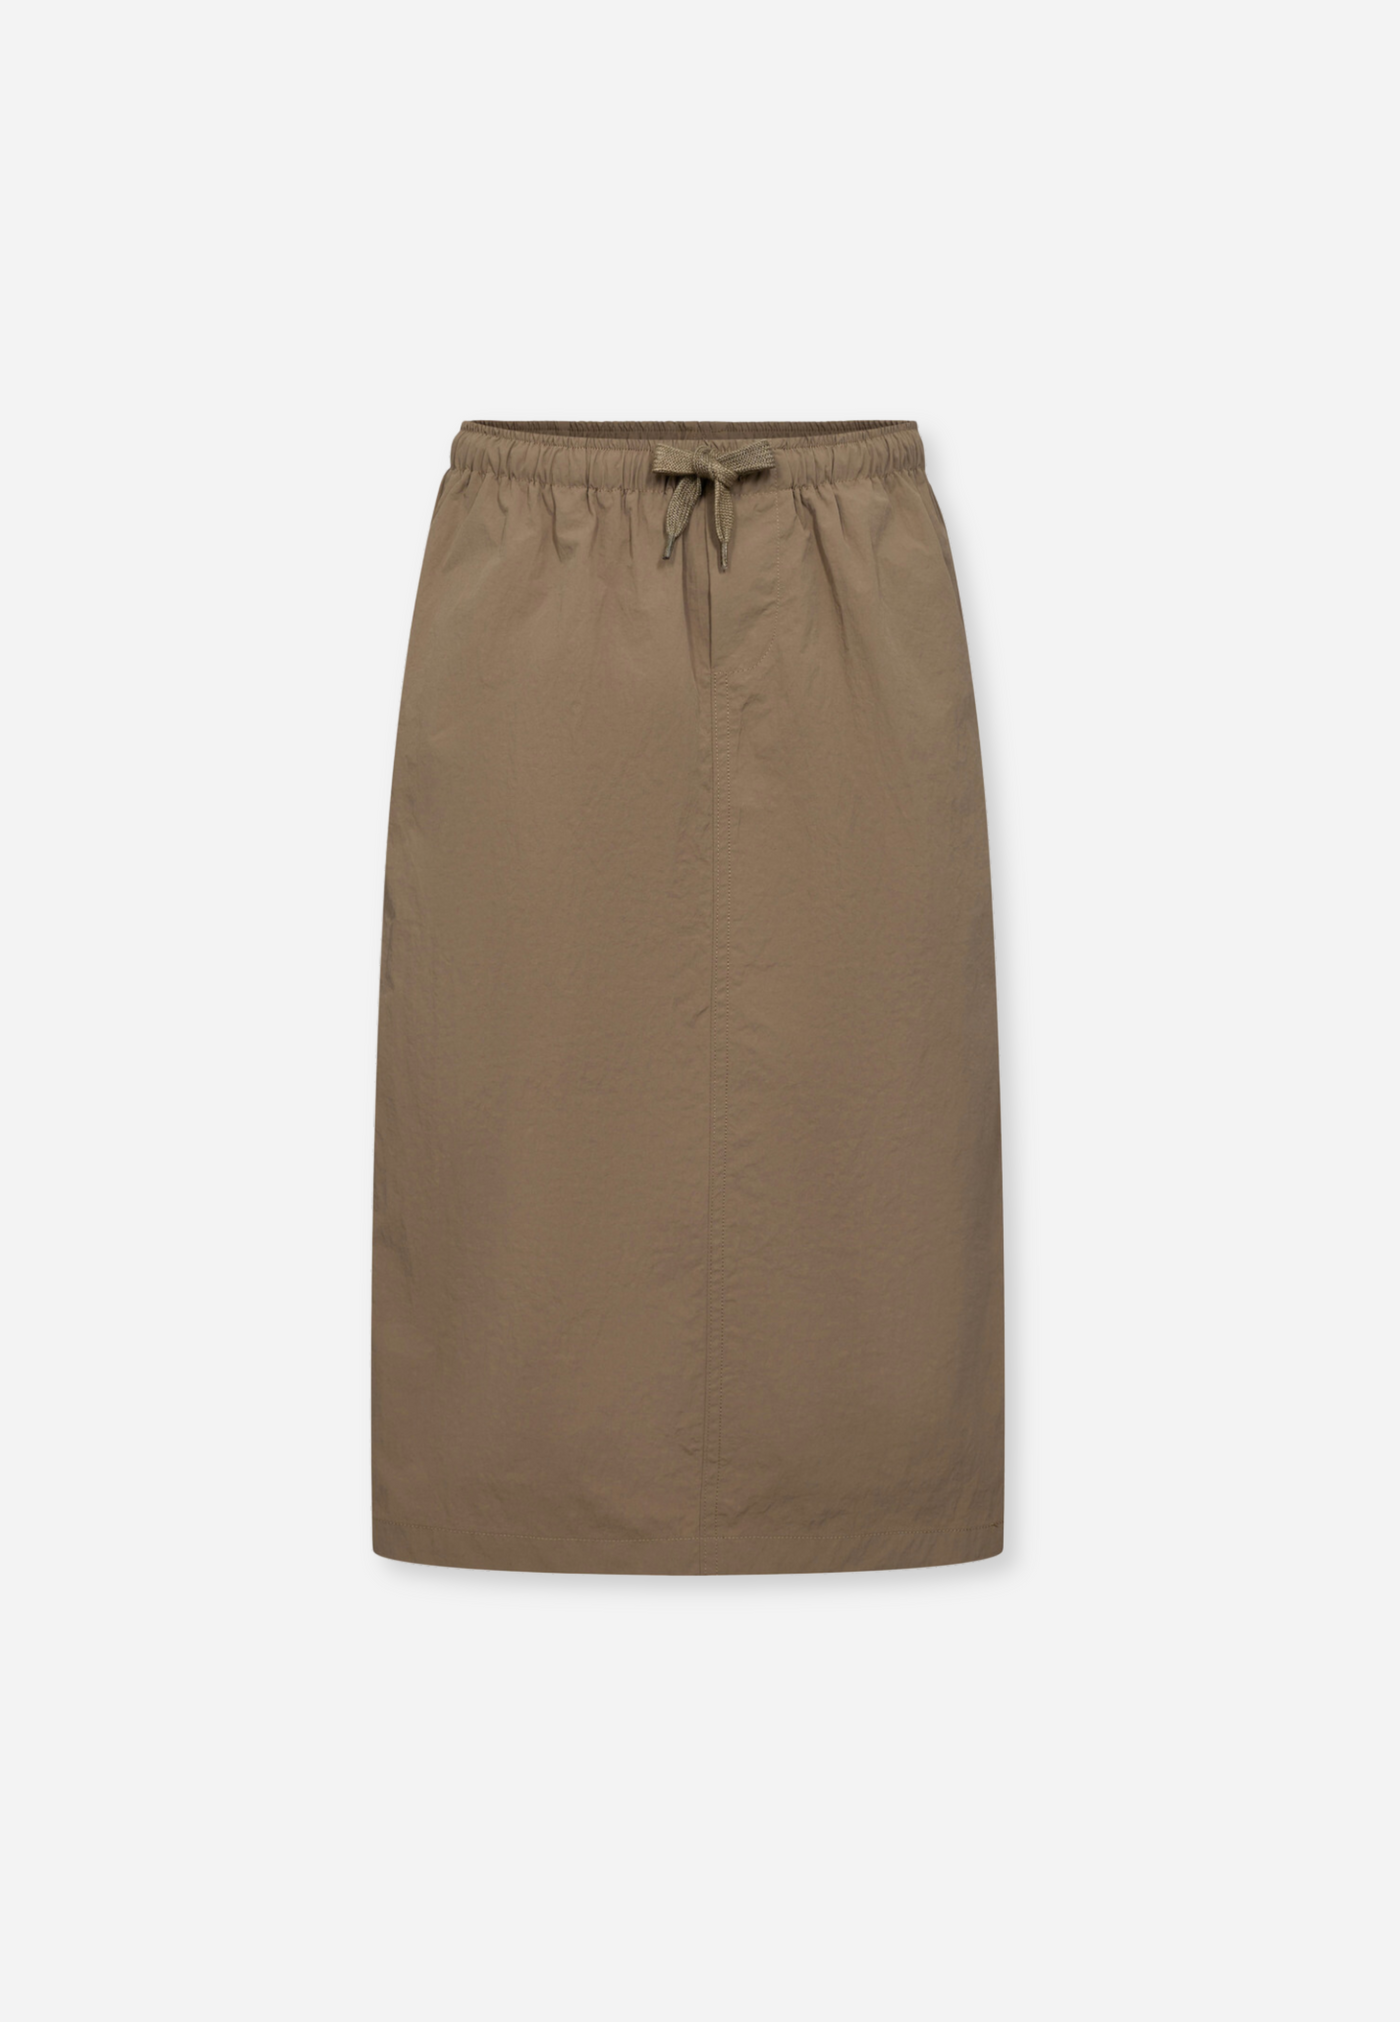 SKIRT - MIDDLE BROWN